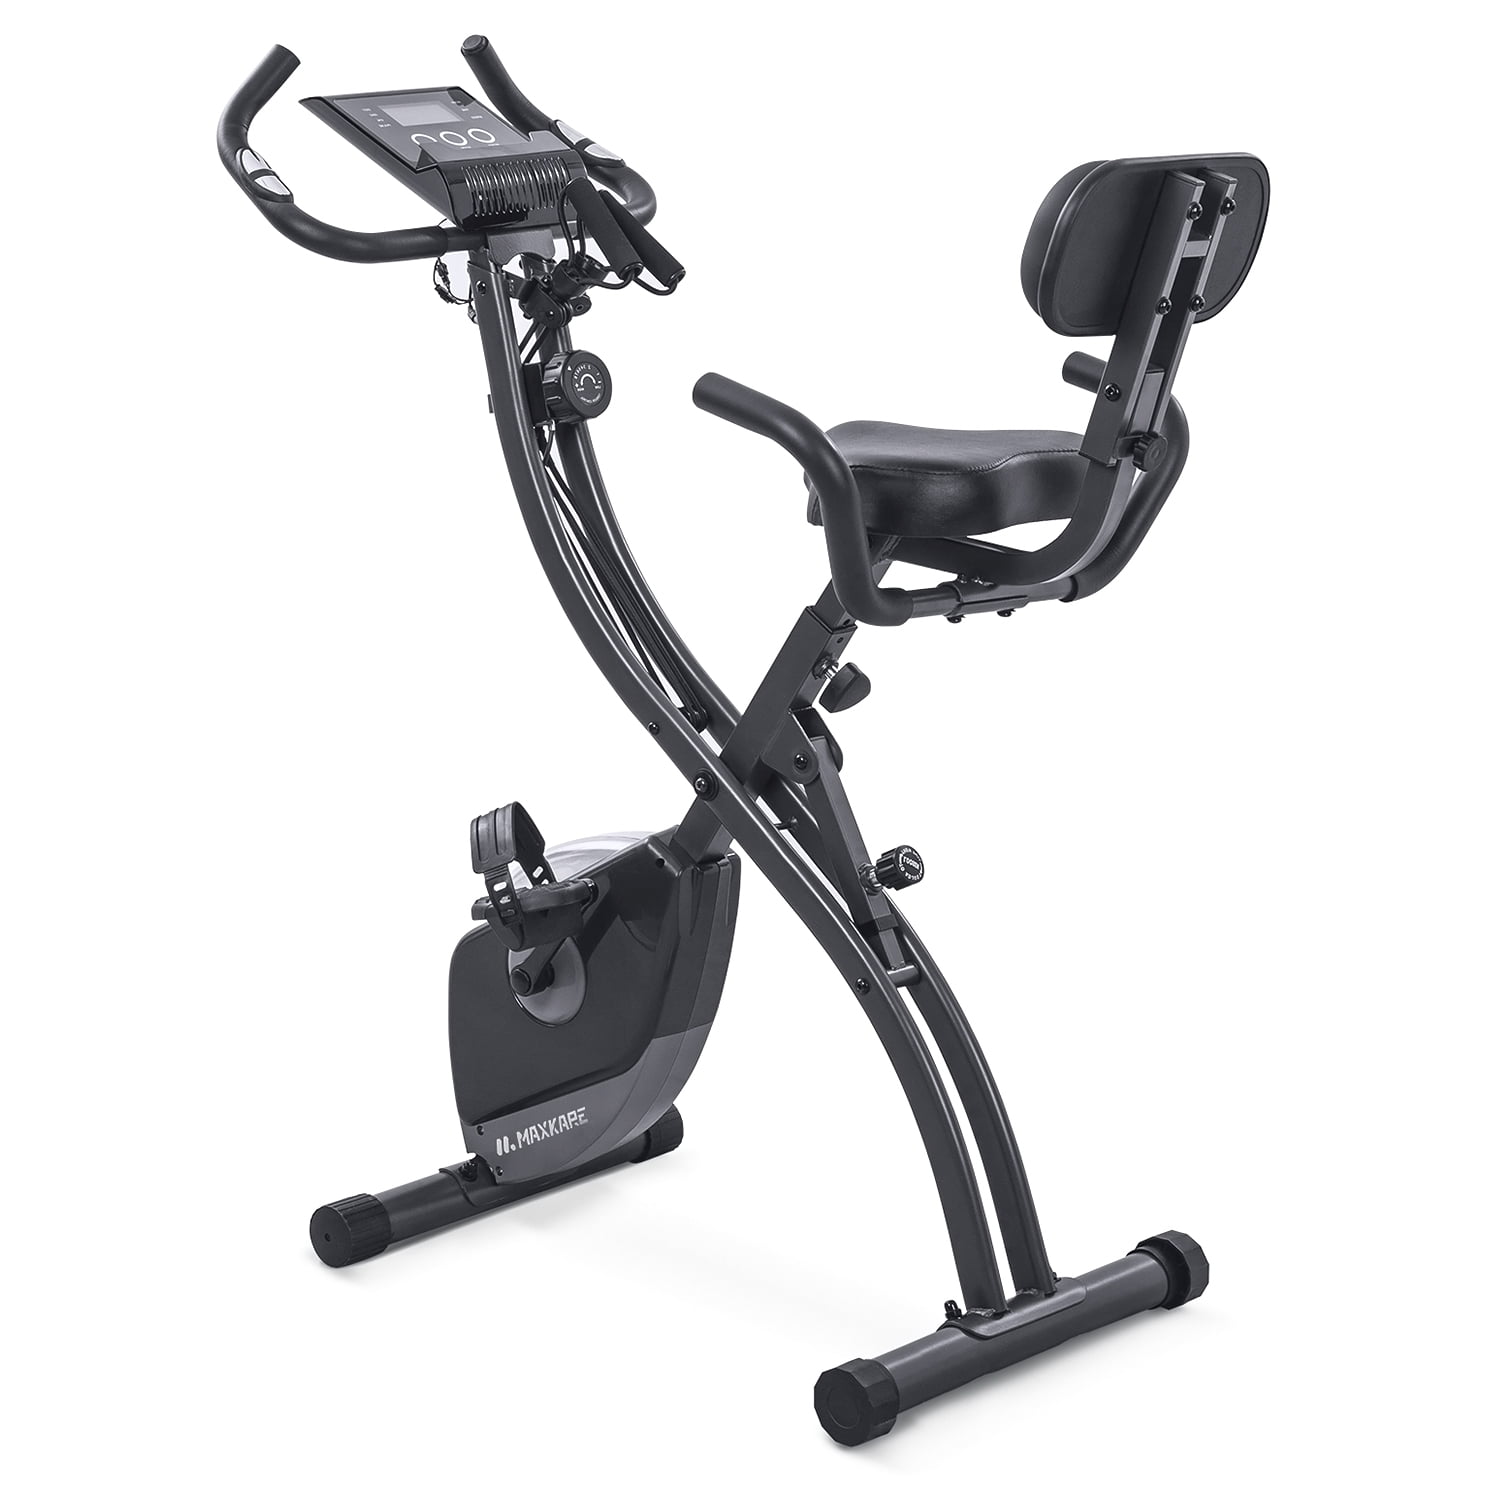 Details about   Cycling Bike Exercise Stationary Bike W/phone Mount Cardio Workout Home Indoor 